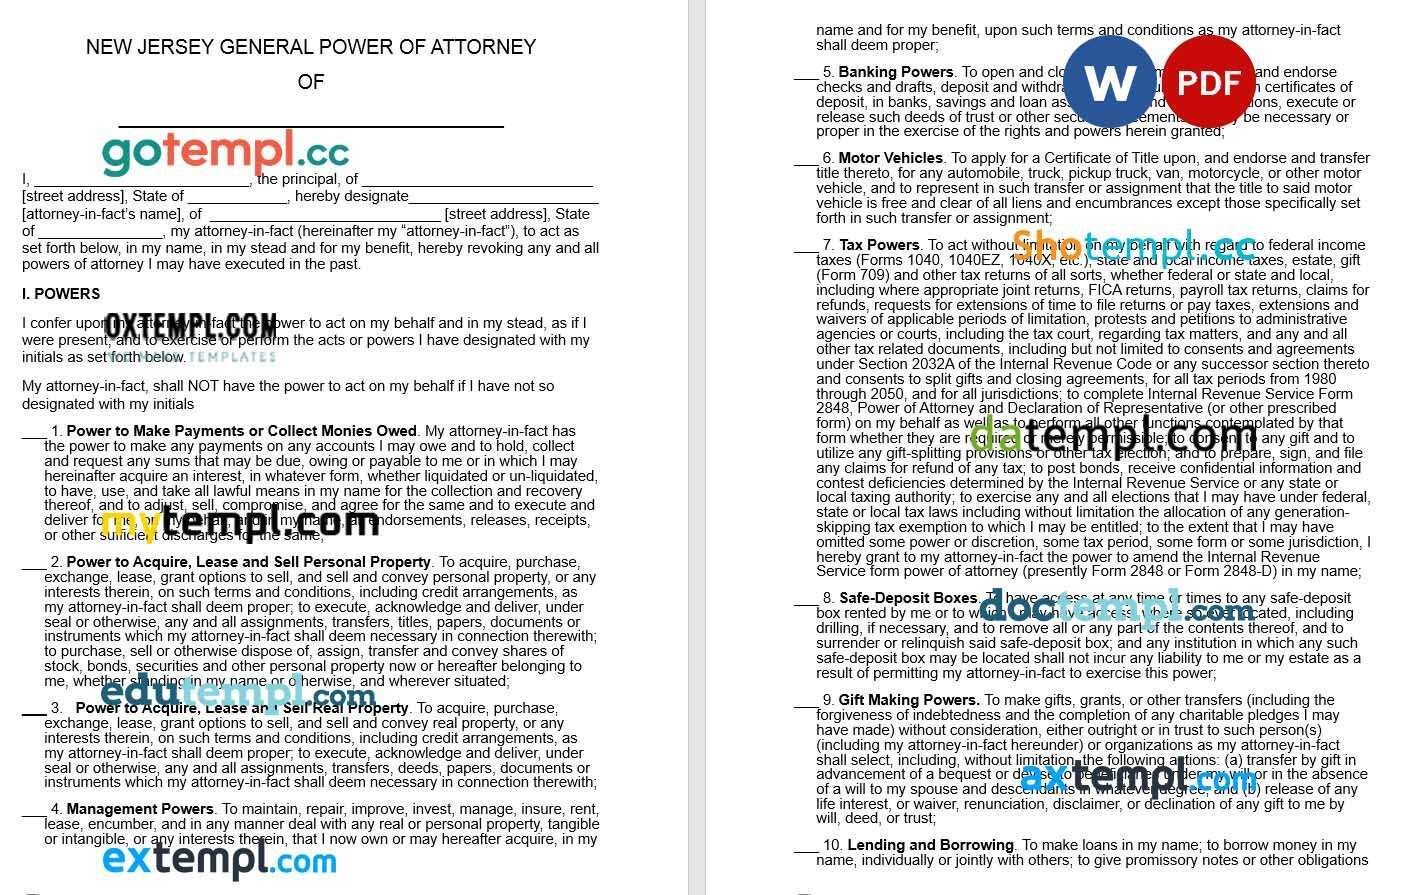 New Jersey General Power of Attorney example, fully editable